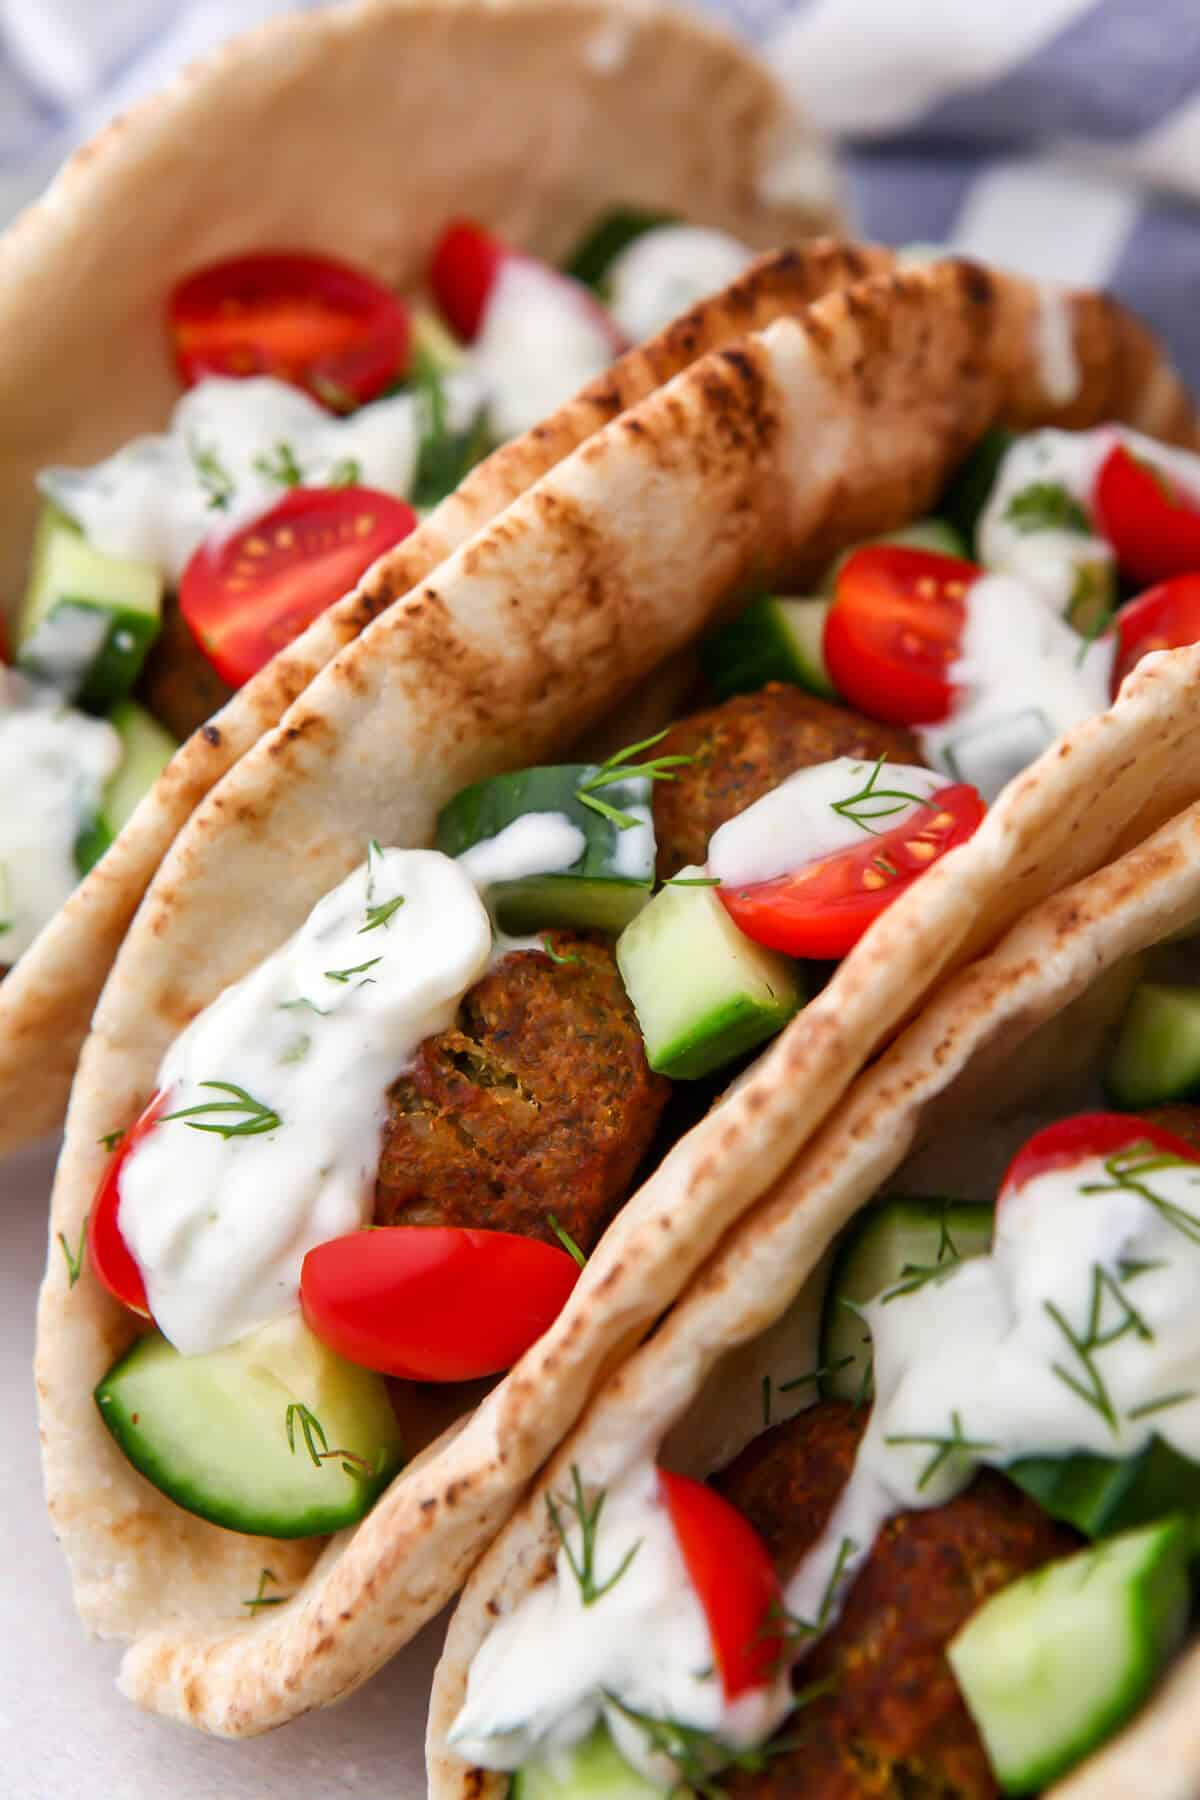 A close up of falafel gyro sandwiches made with pita bread and falafel with cucumbers and tomatoes on top.